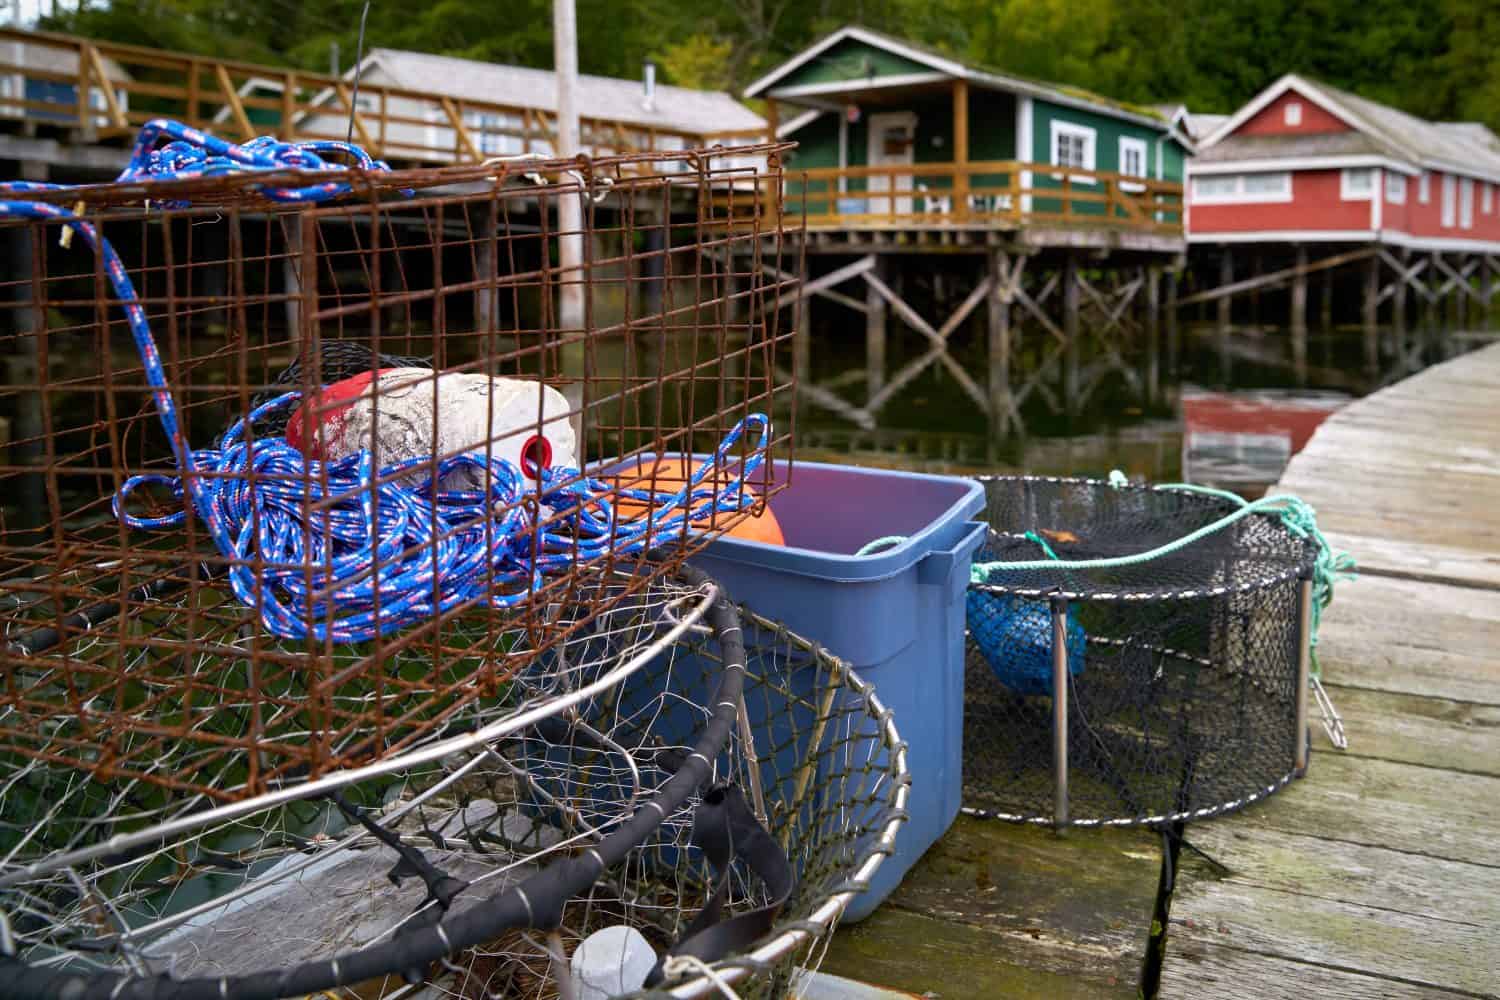 Crab Pots on the Telegraph Cove Marina Dock. Crab pots on the Telegraph Cove marina dock. Historic boardwalk in the background.